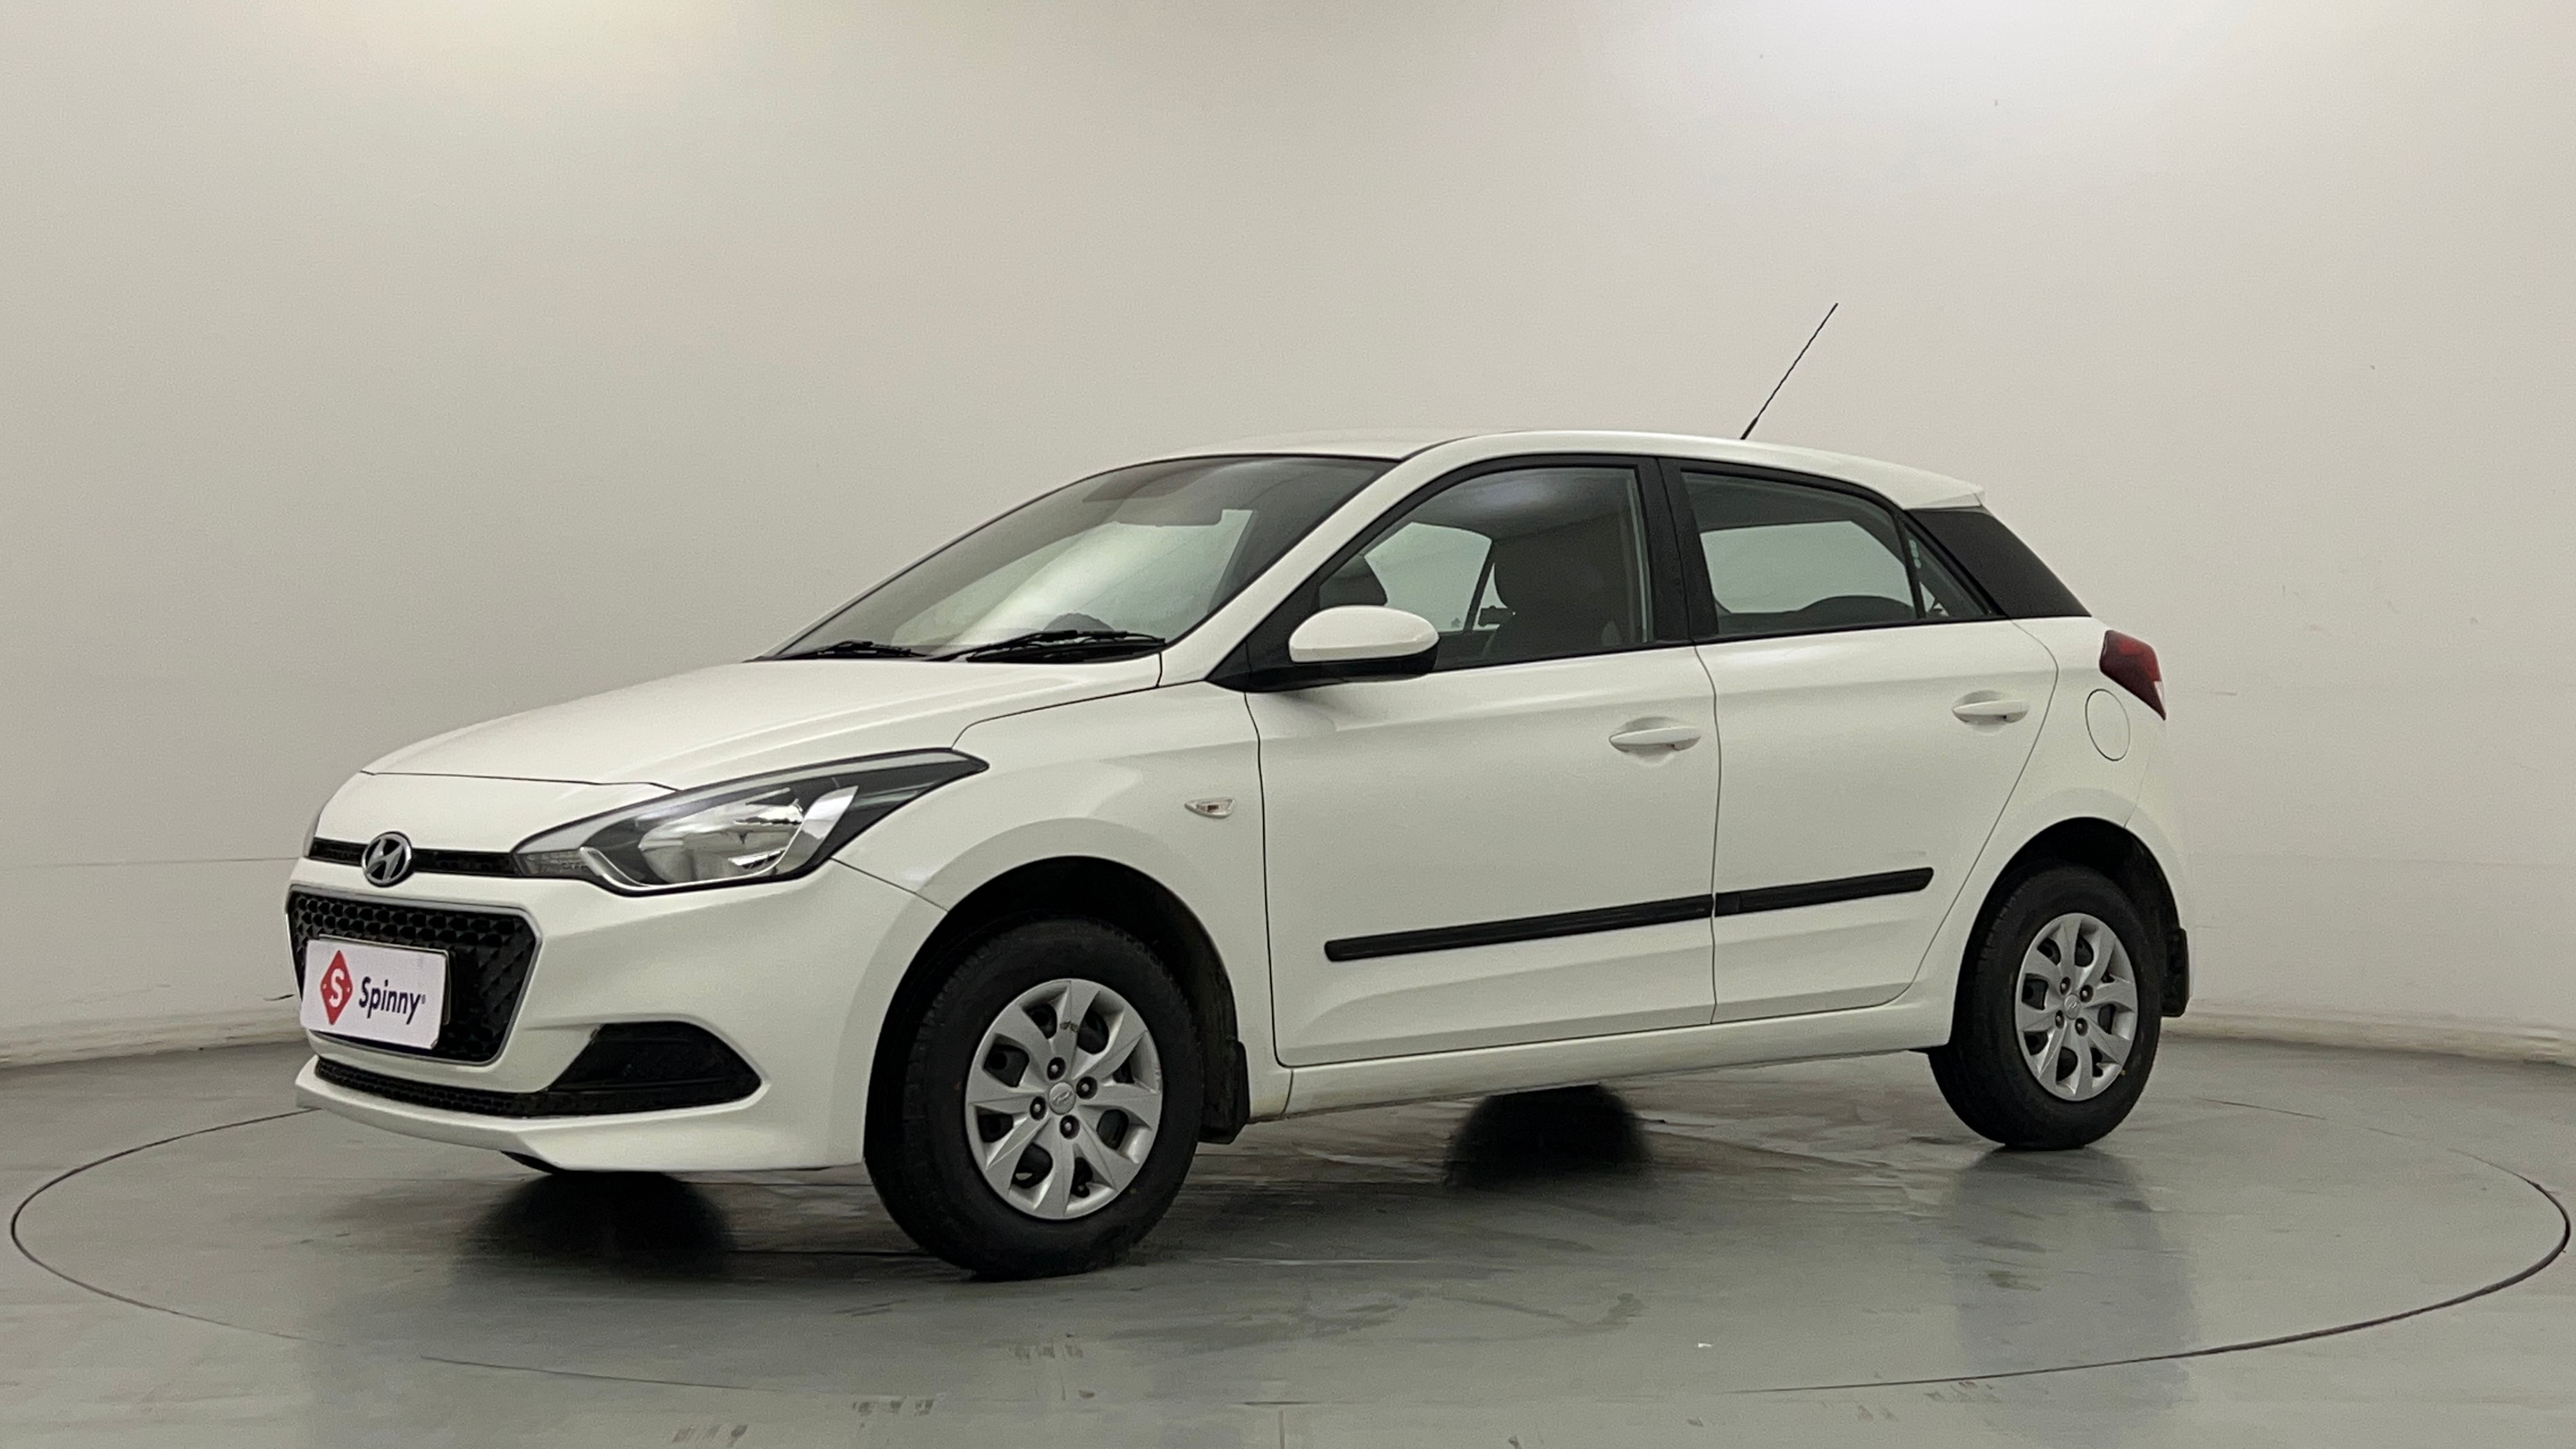 Complete Guide on Buying a Hyundai i20